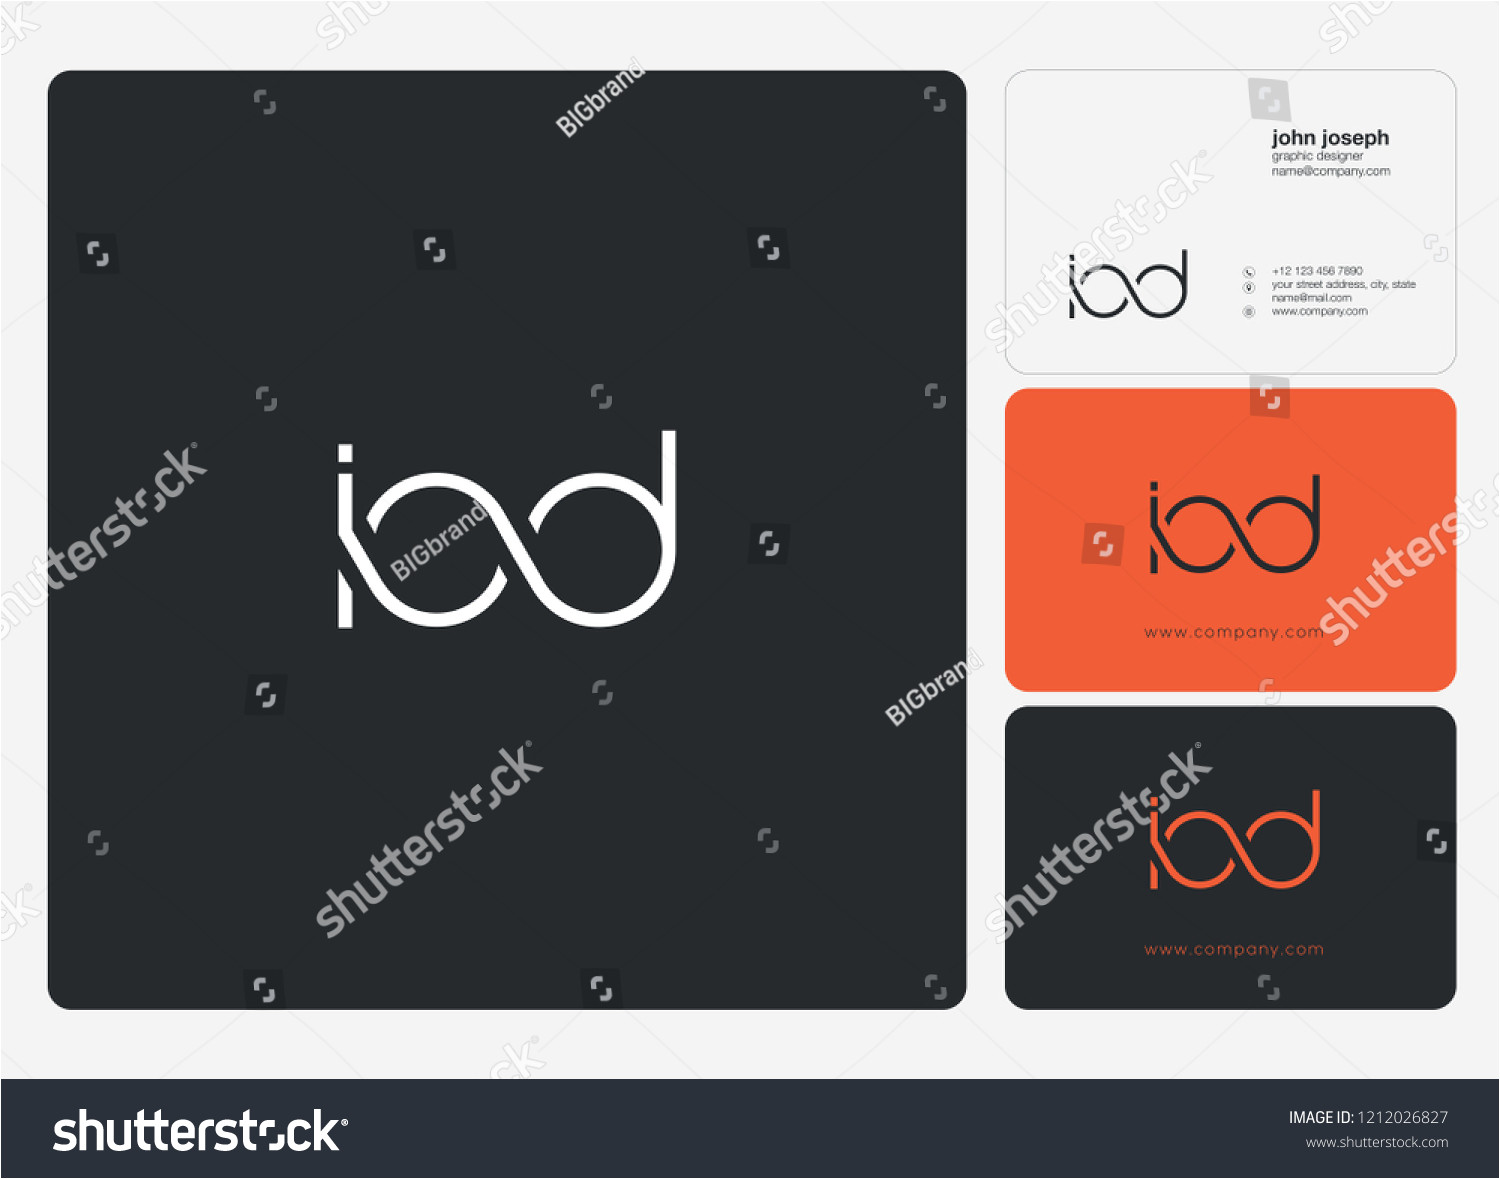 stock vector letters i o d logo icon with business card vector template 1212026827 jpg